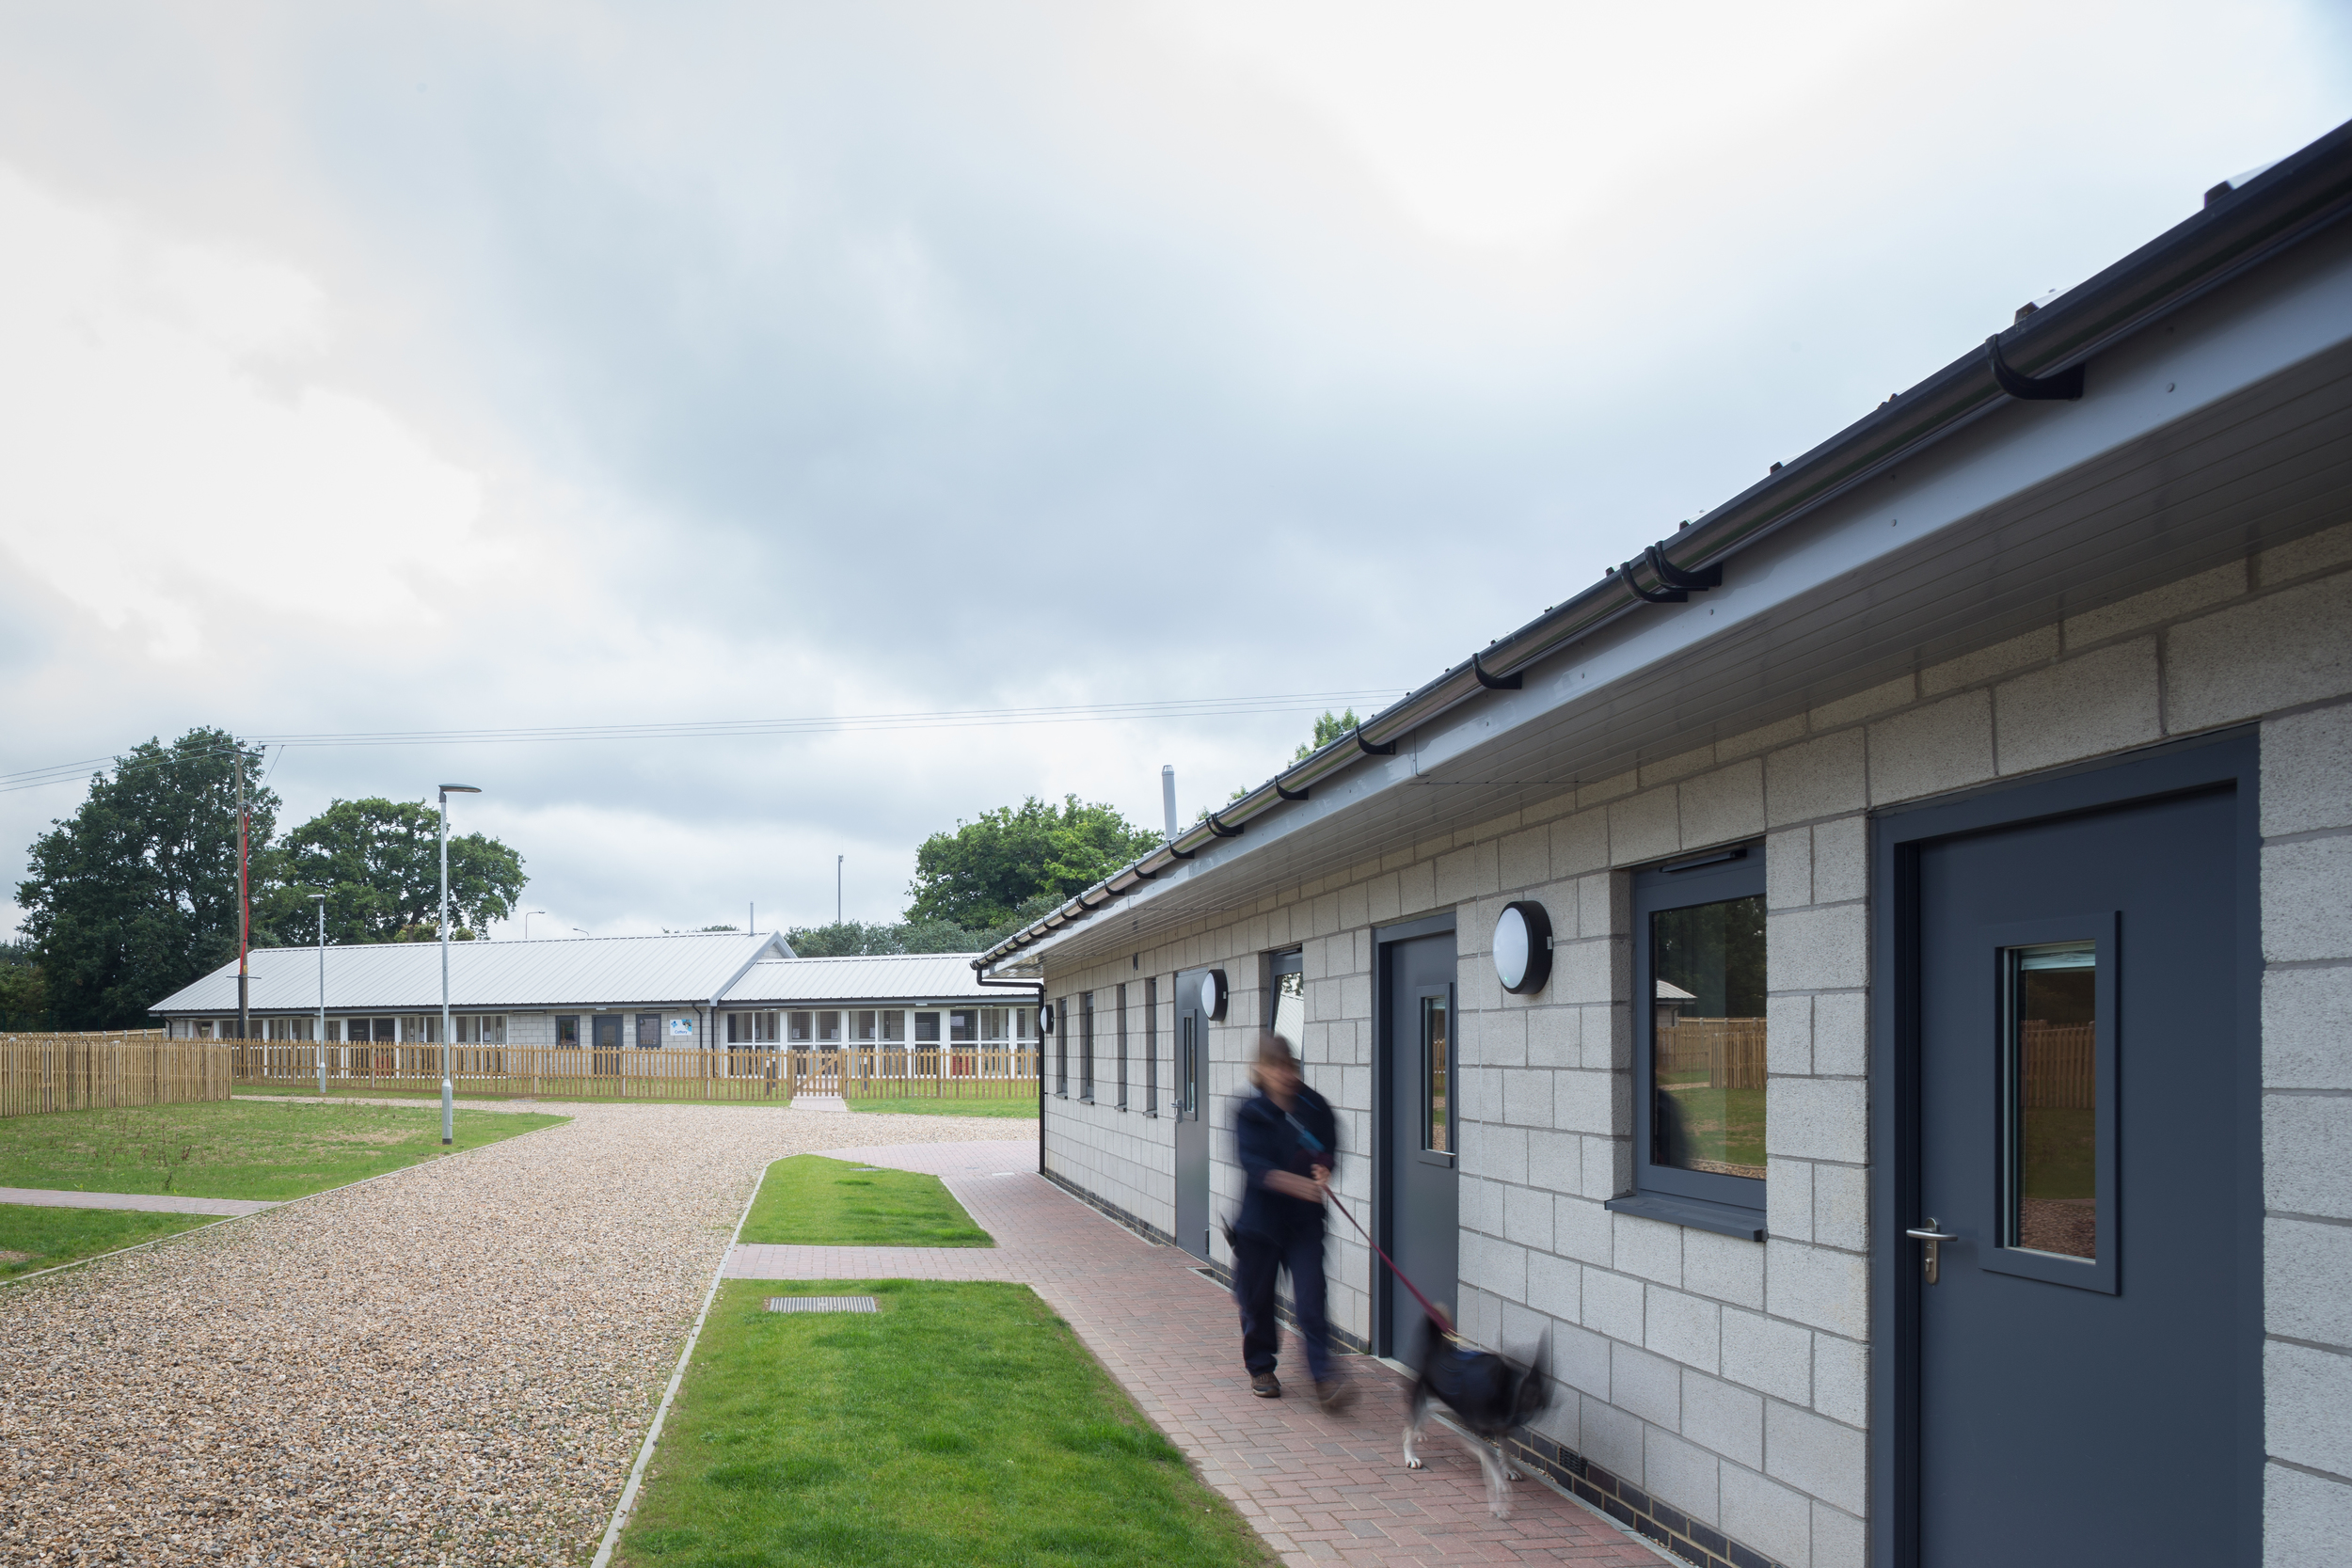  Patrick Allen &amp; Associates Ltd were appointed to design a new animal welfare centre in Wherstead, Ipswich, as the charity needed to relocate to a larger premises. 